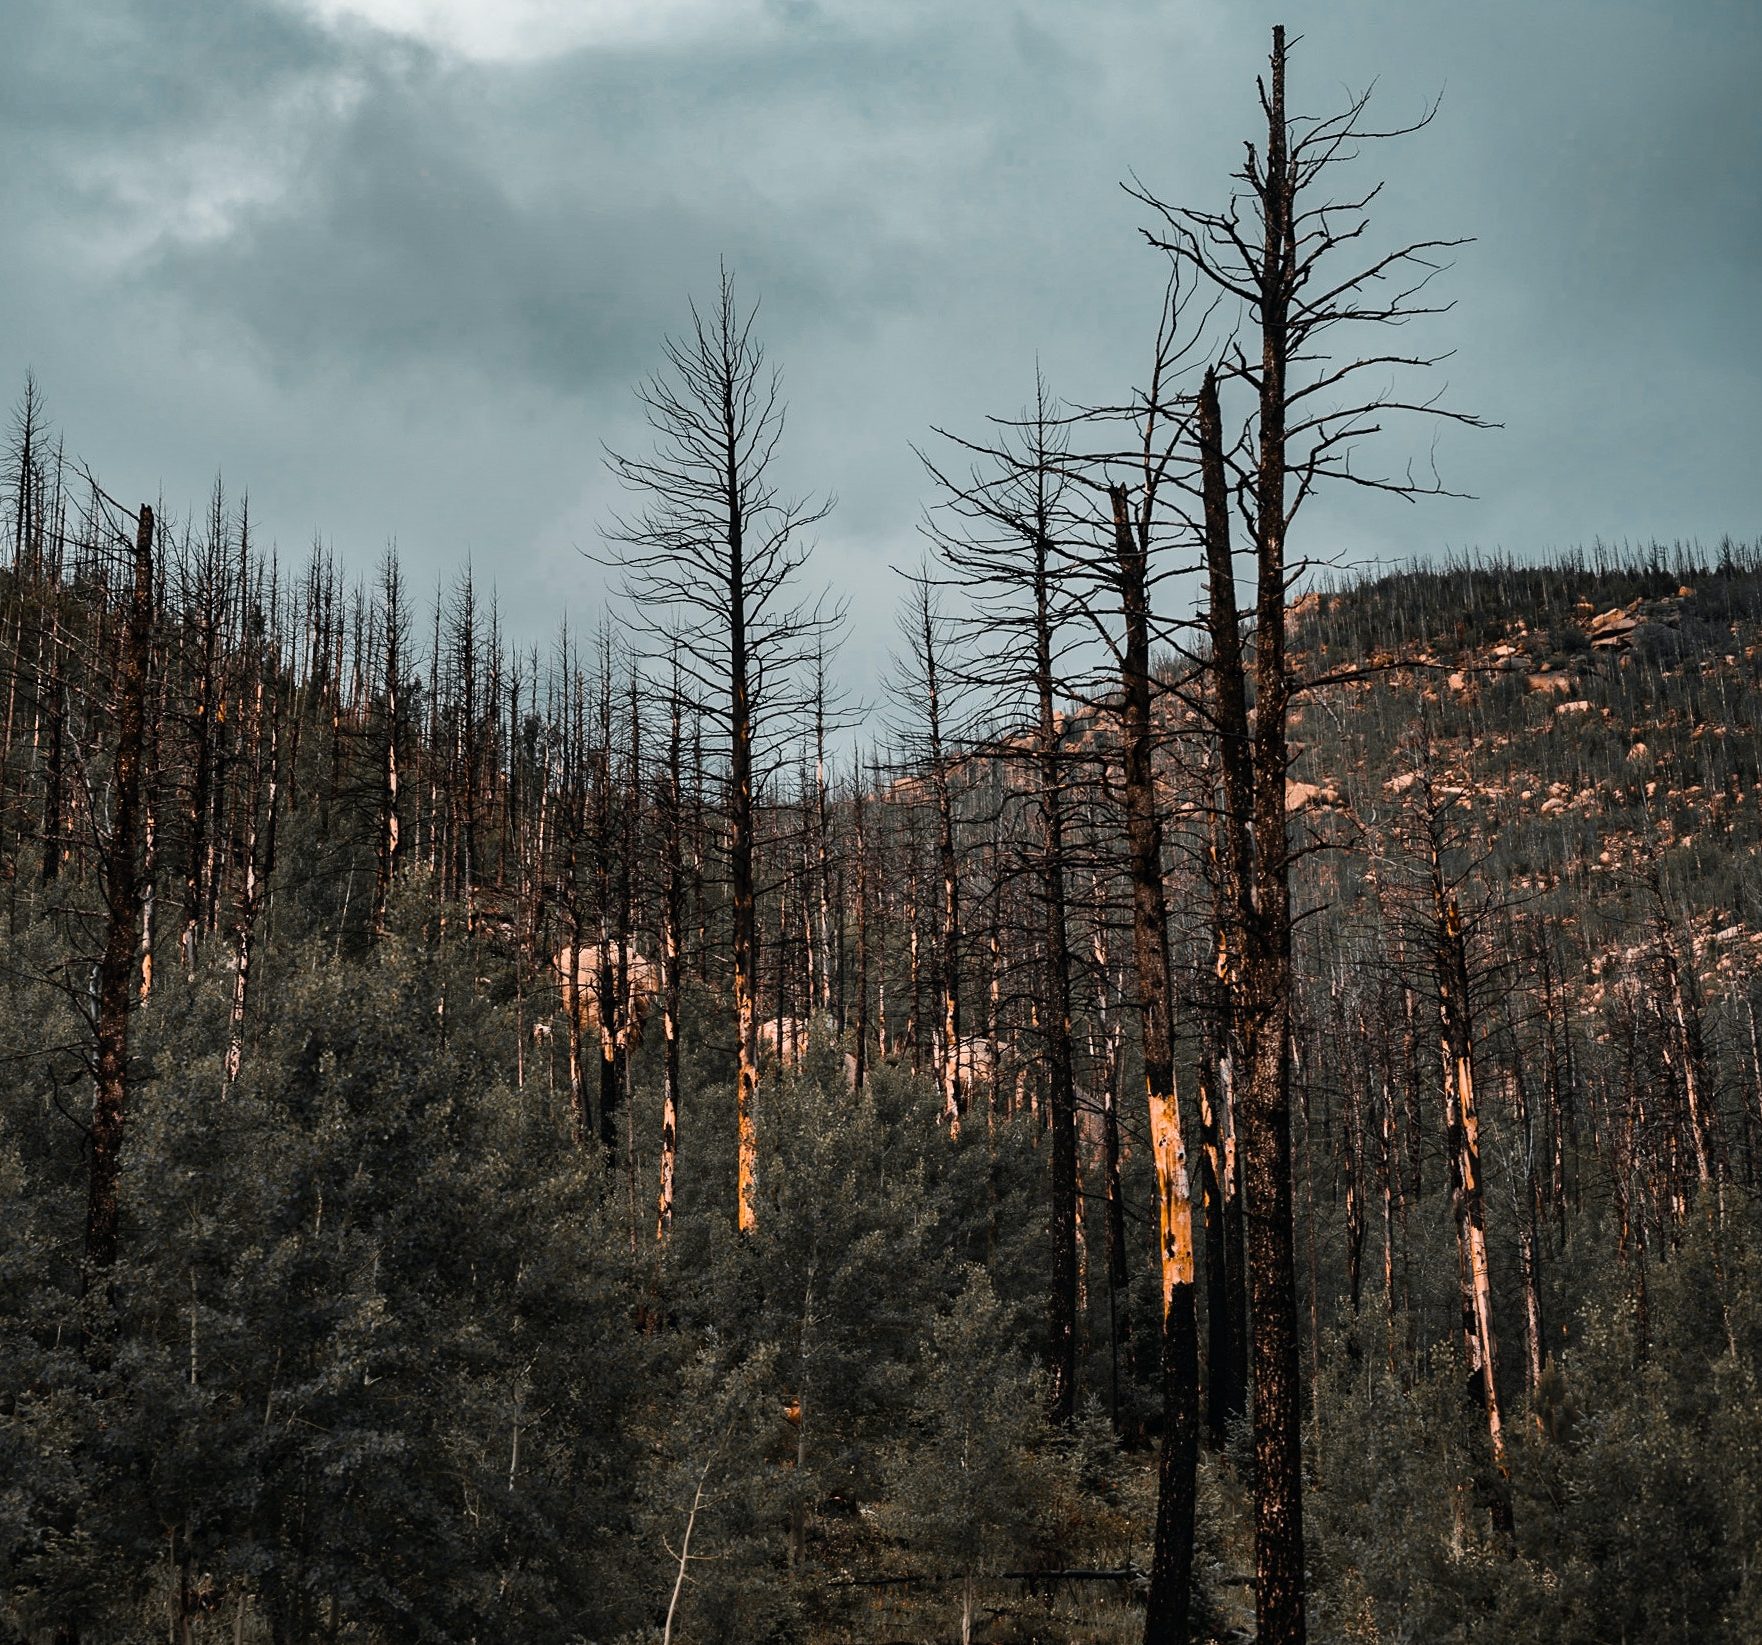 How to protect forests from wildfires?